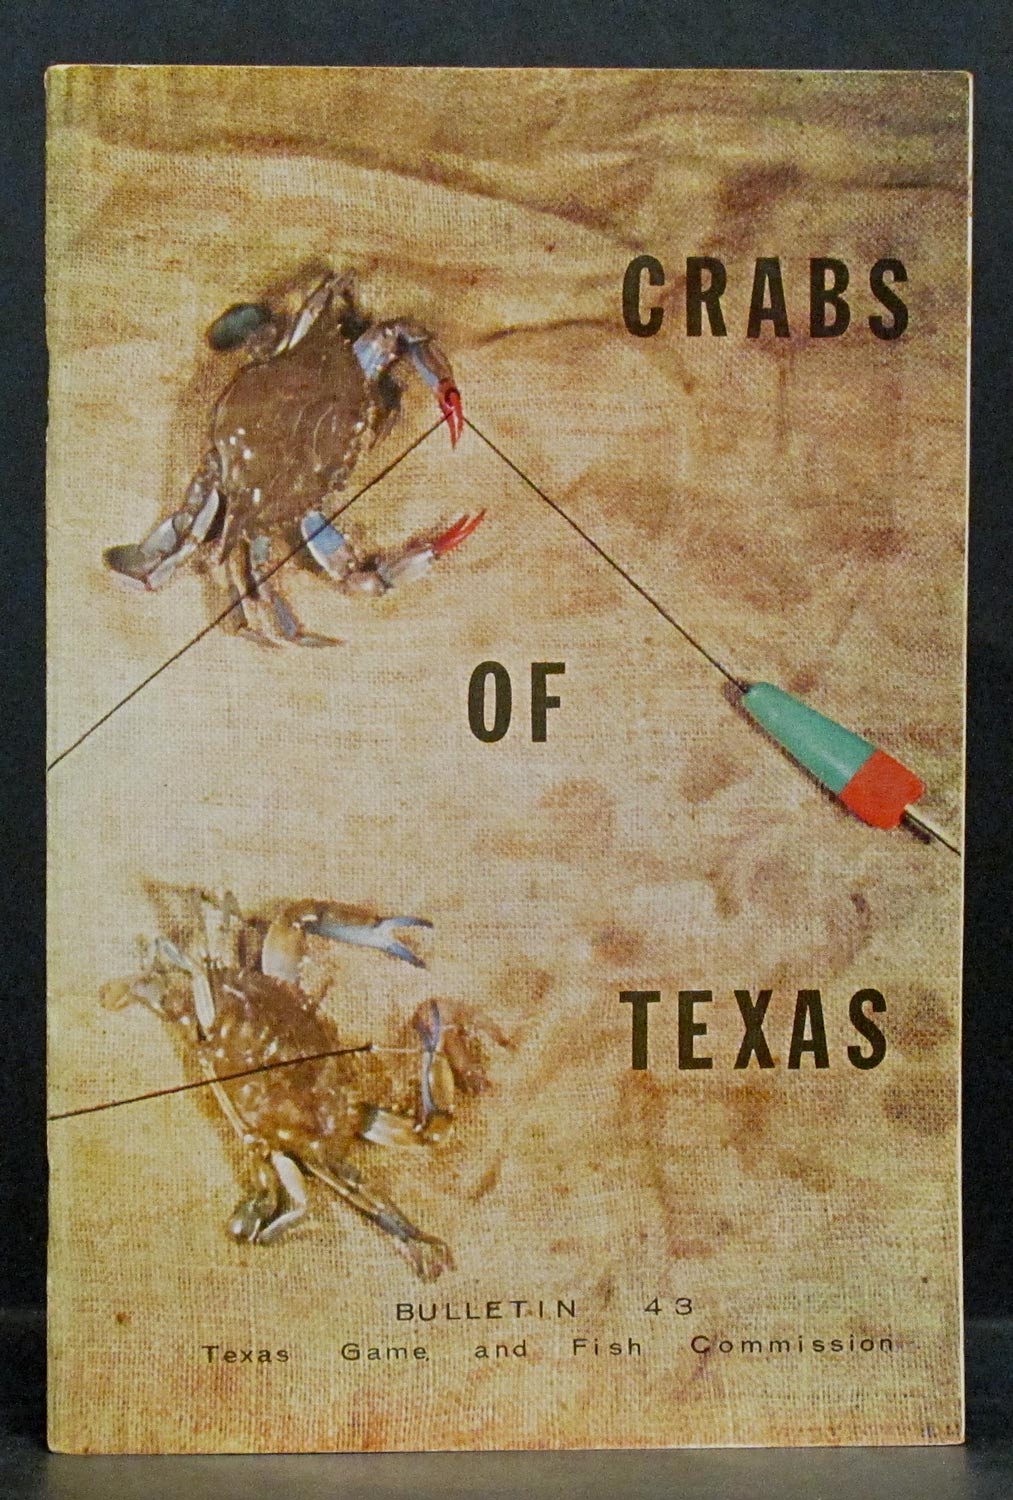 Crabs of Texas: Bulletin 43, Series VII Coastal Fisheries by Leary, Sandra  Pounds.: Fine (1961)